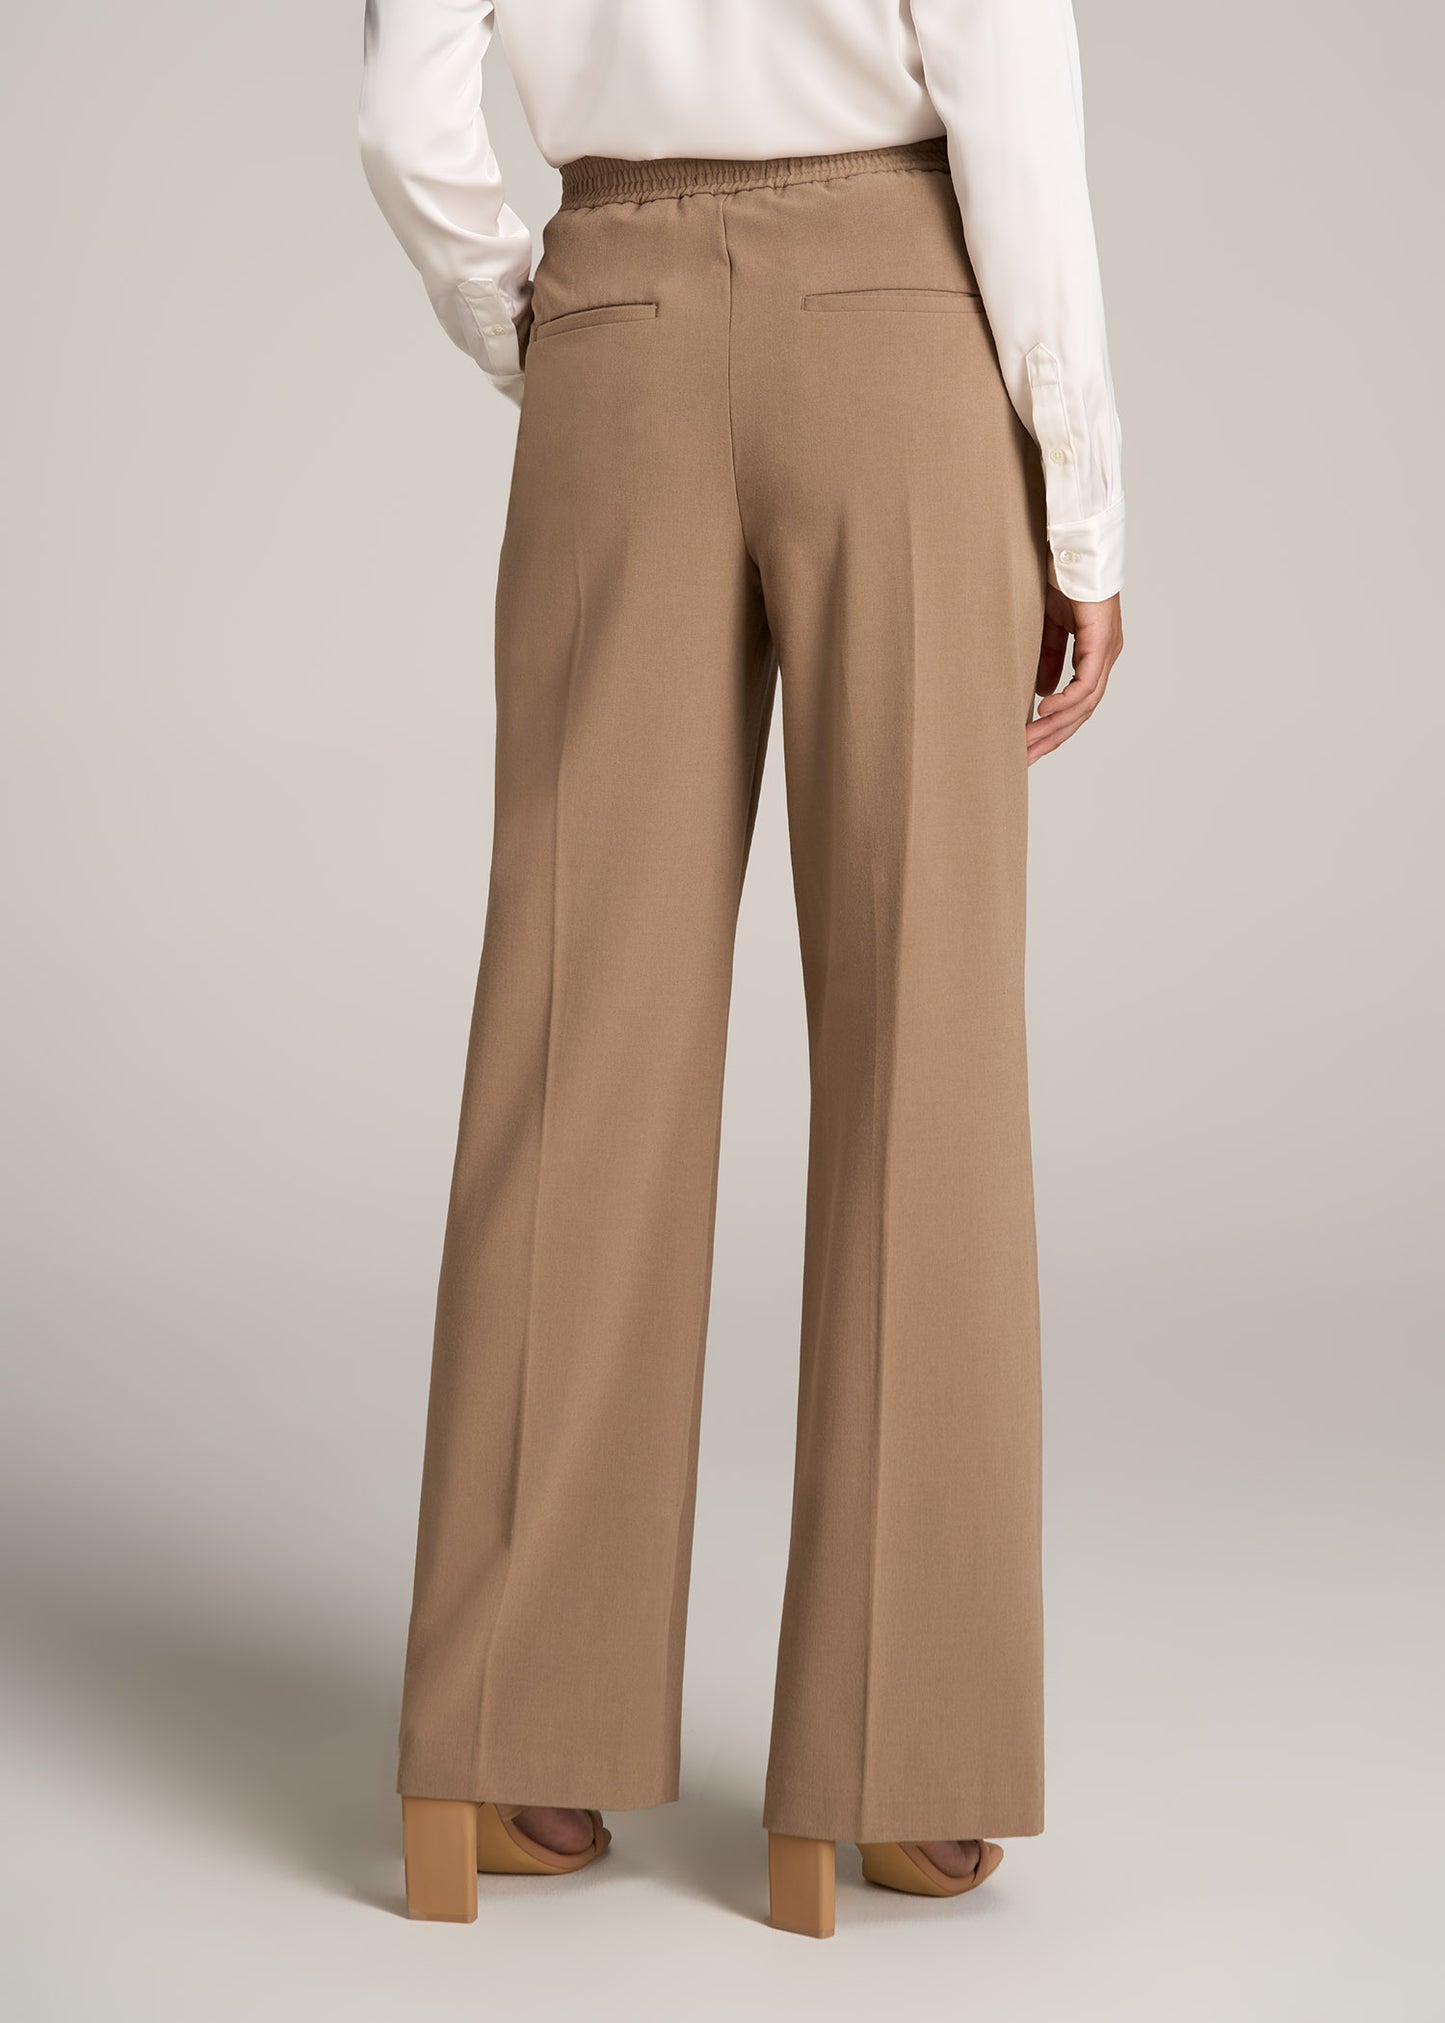  Palazzo Pants for Women Dressy Tall Business Work